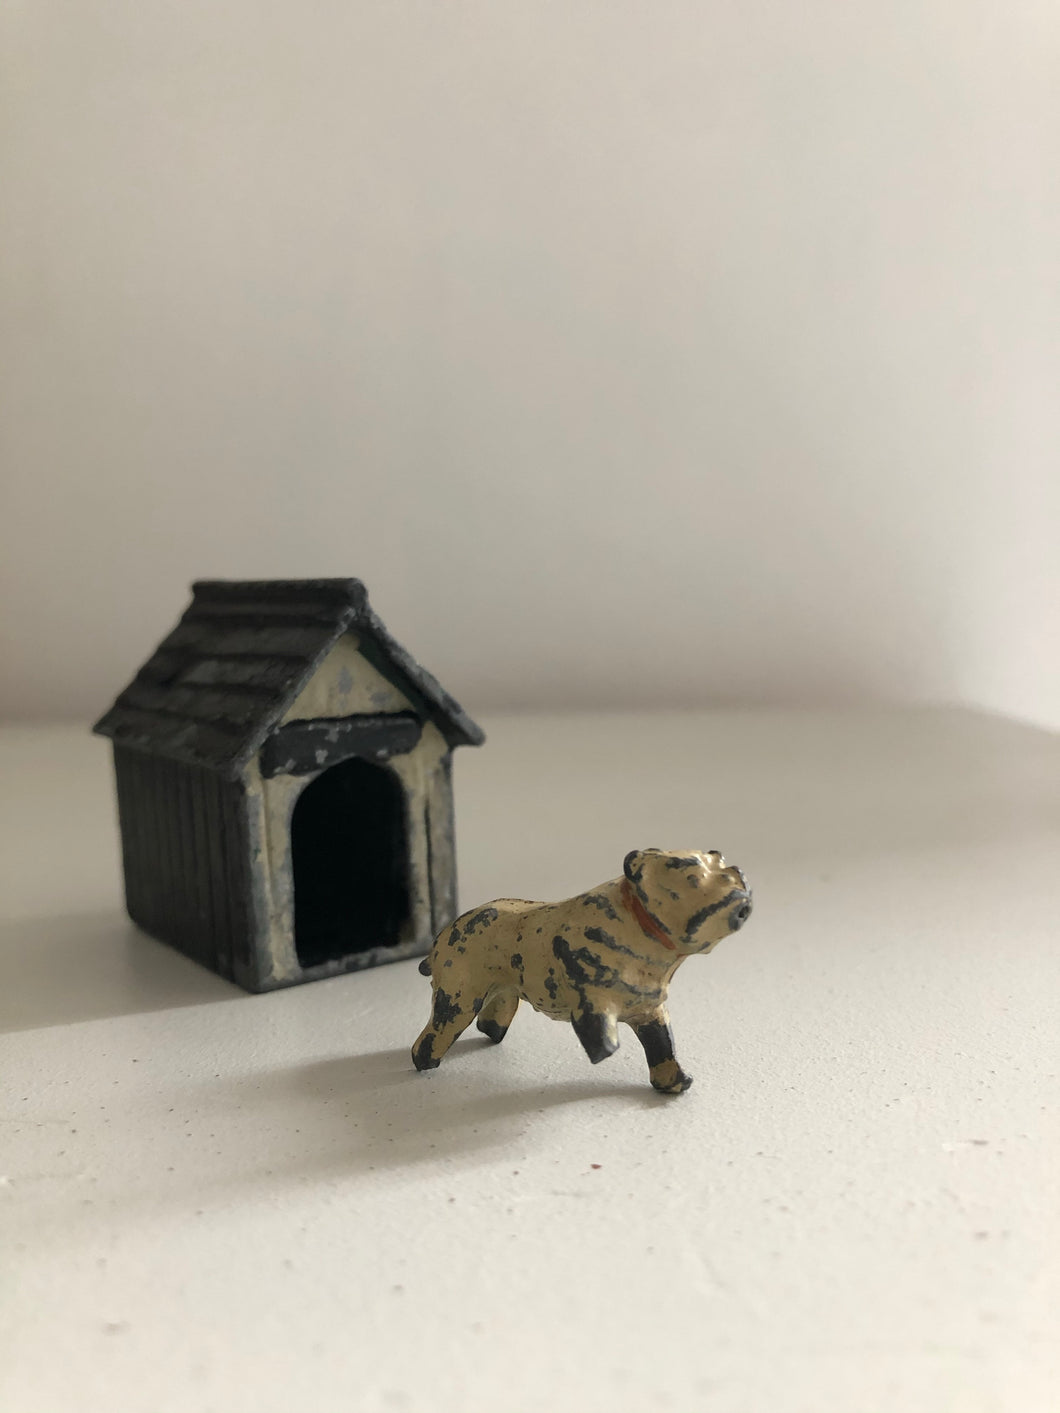 Vintage Lead Britains Bulldog with Kennel